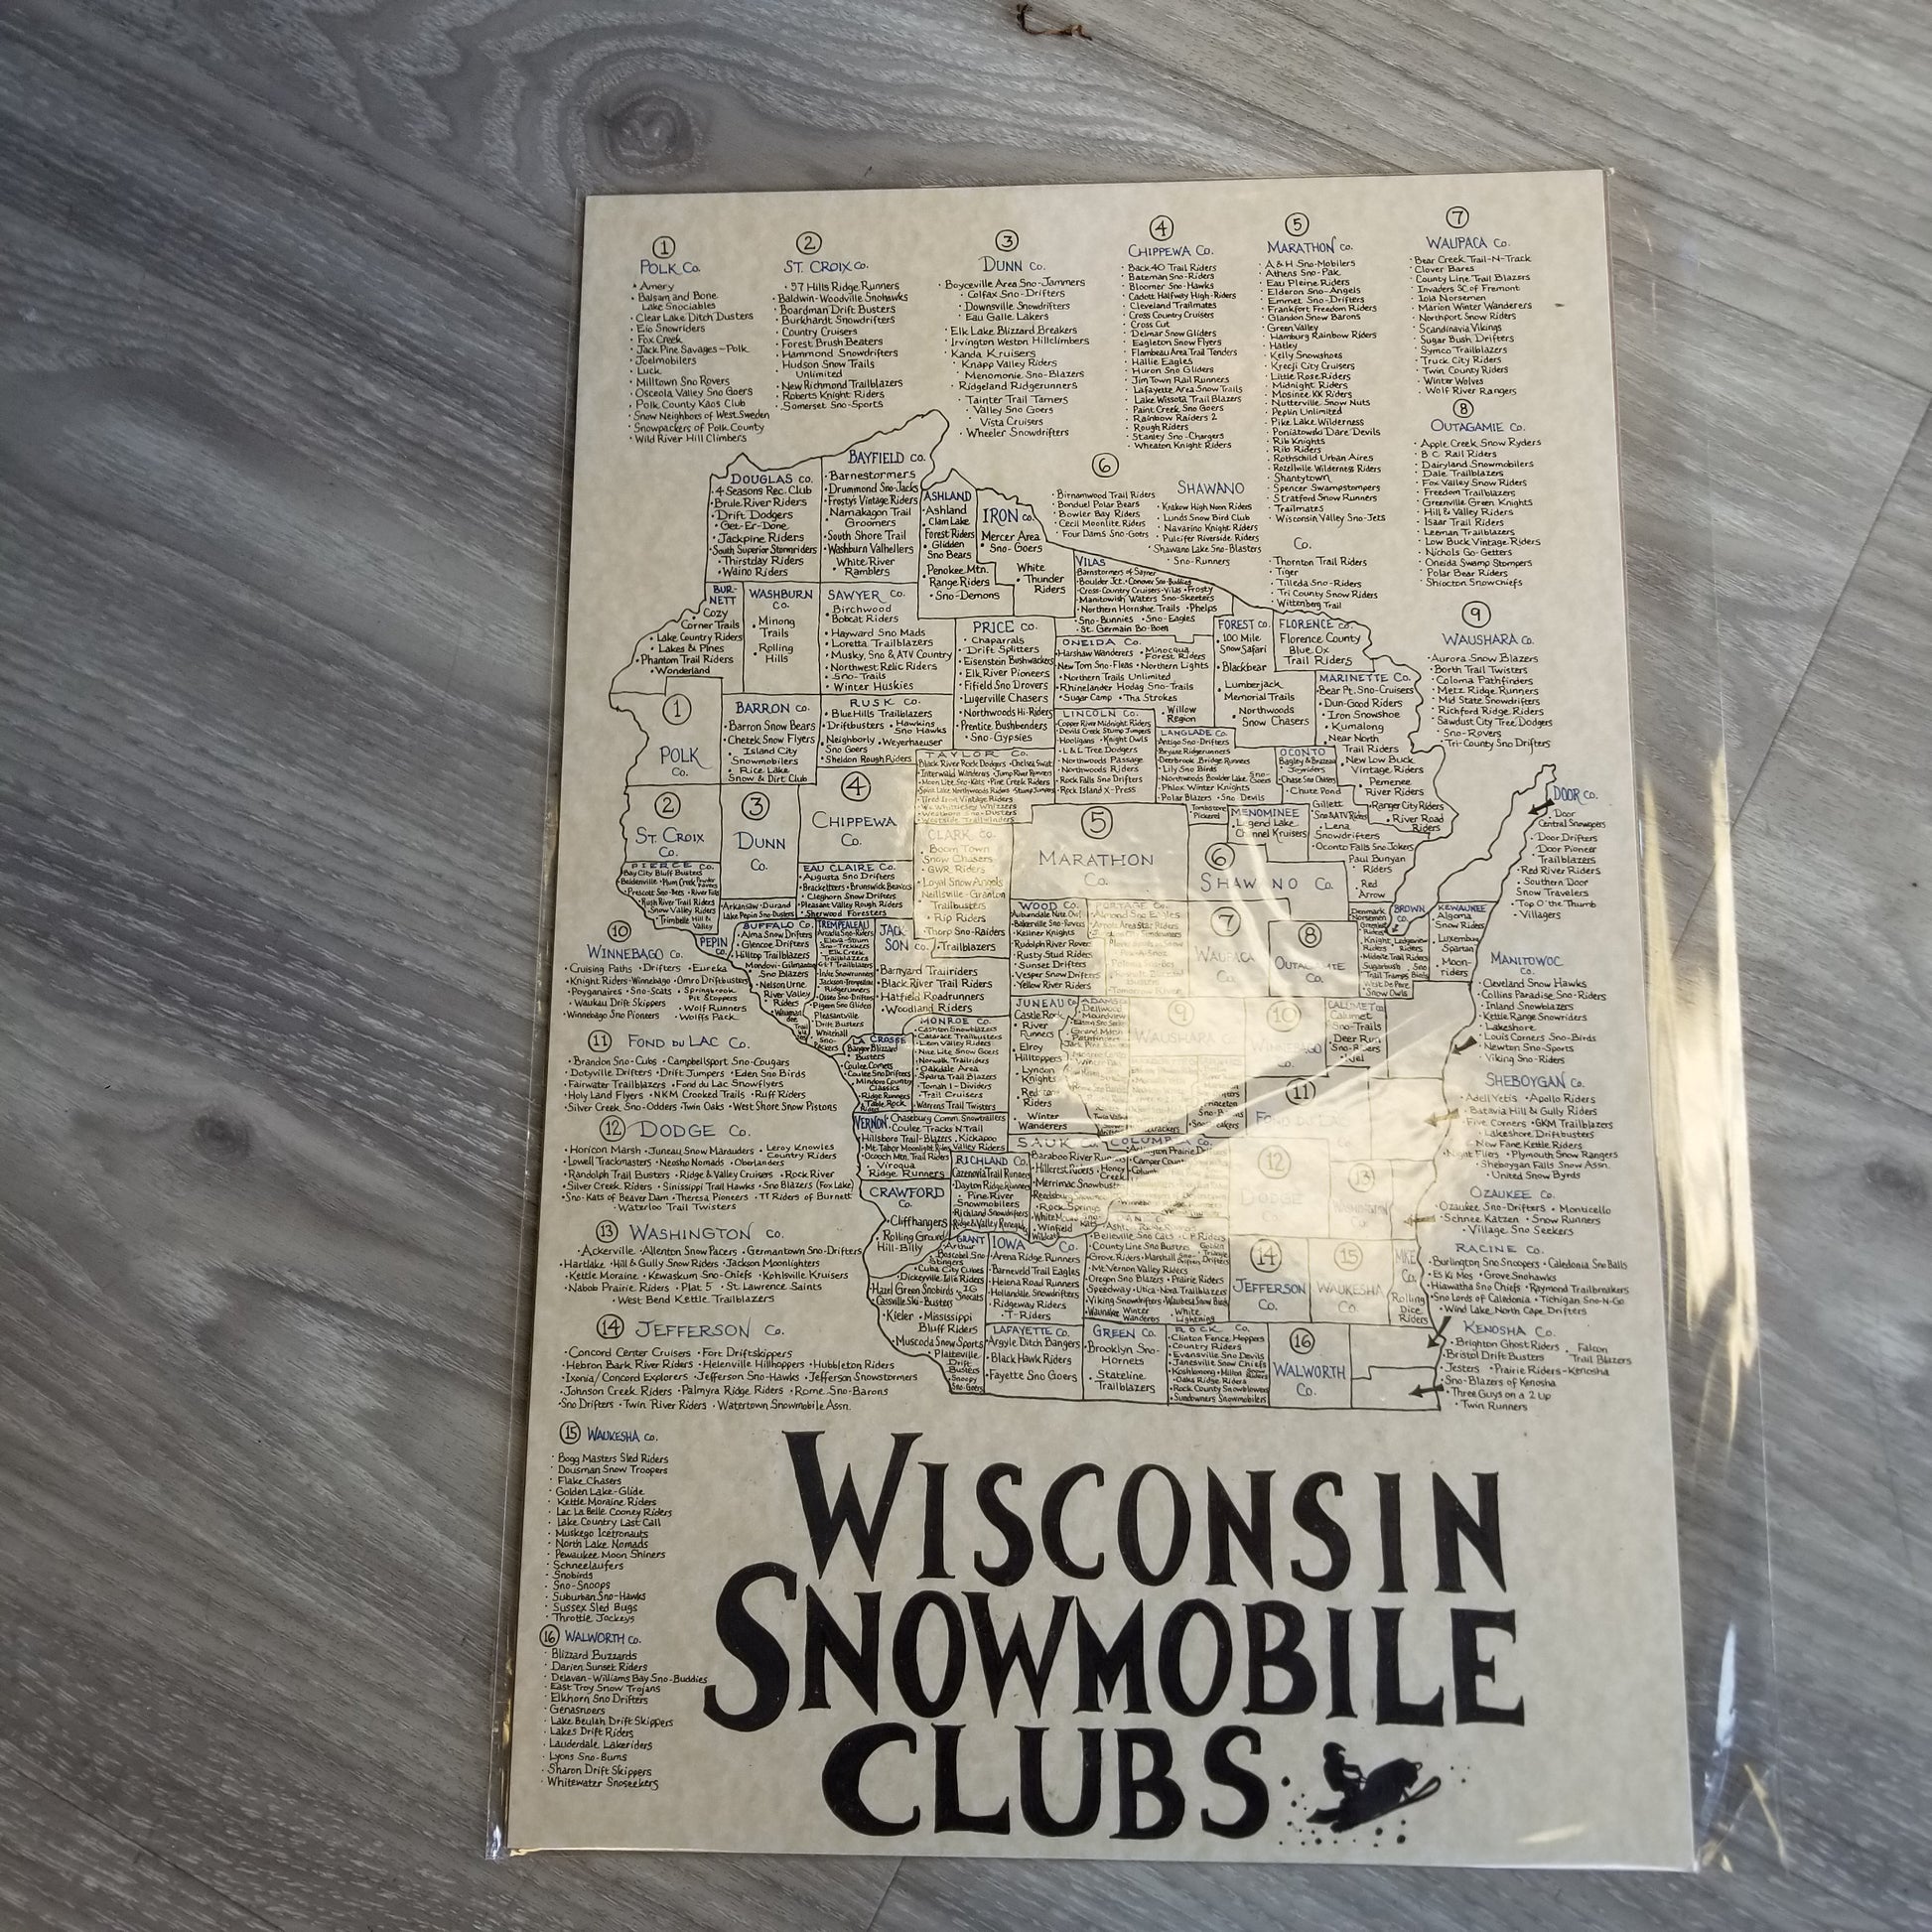 Wisconsin snowmobile clubs map